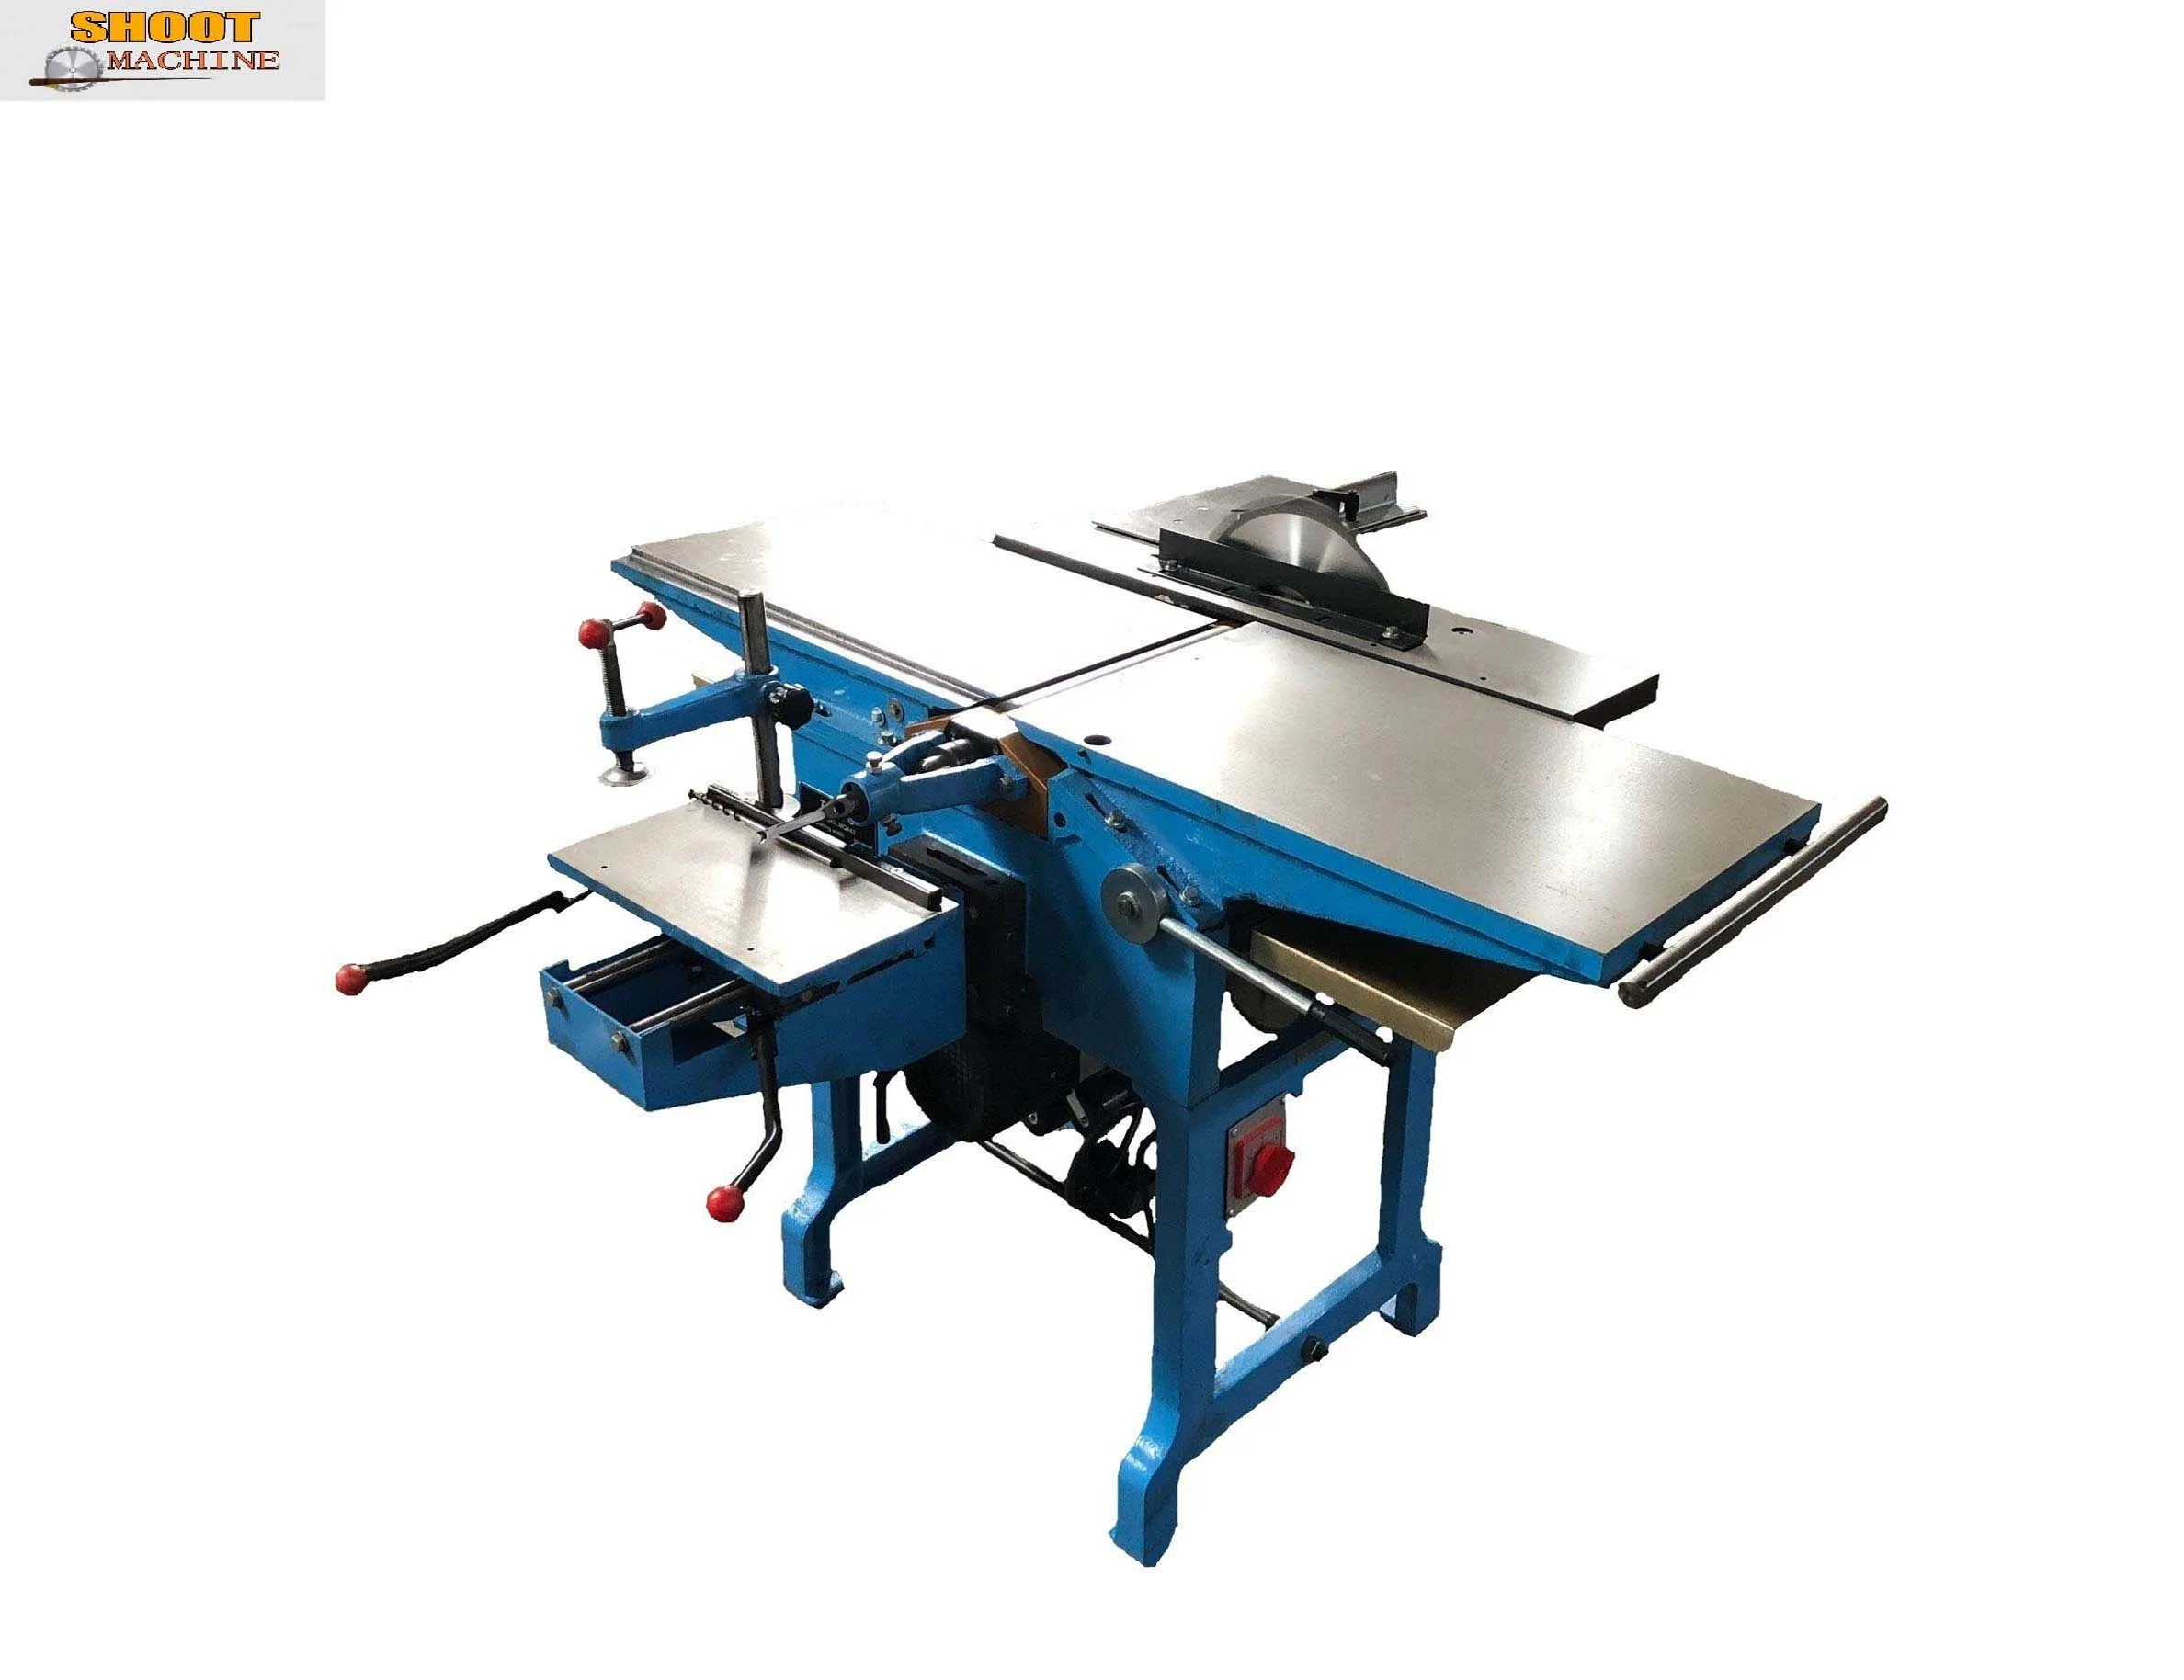 Multi Use Woodworking Machine Mq443a With Max Planning Width 300mm And Max Planning Depth 3mm Buy Multi Use Woodworking Machine Combination Woodworking Machines Woodworking Combined Machine Product On Alibaba Com